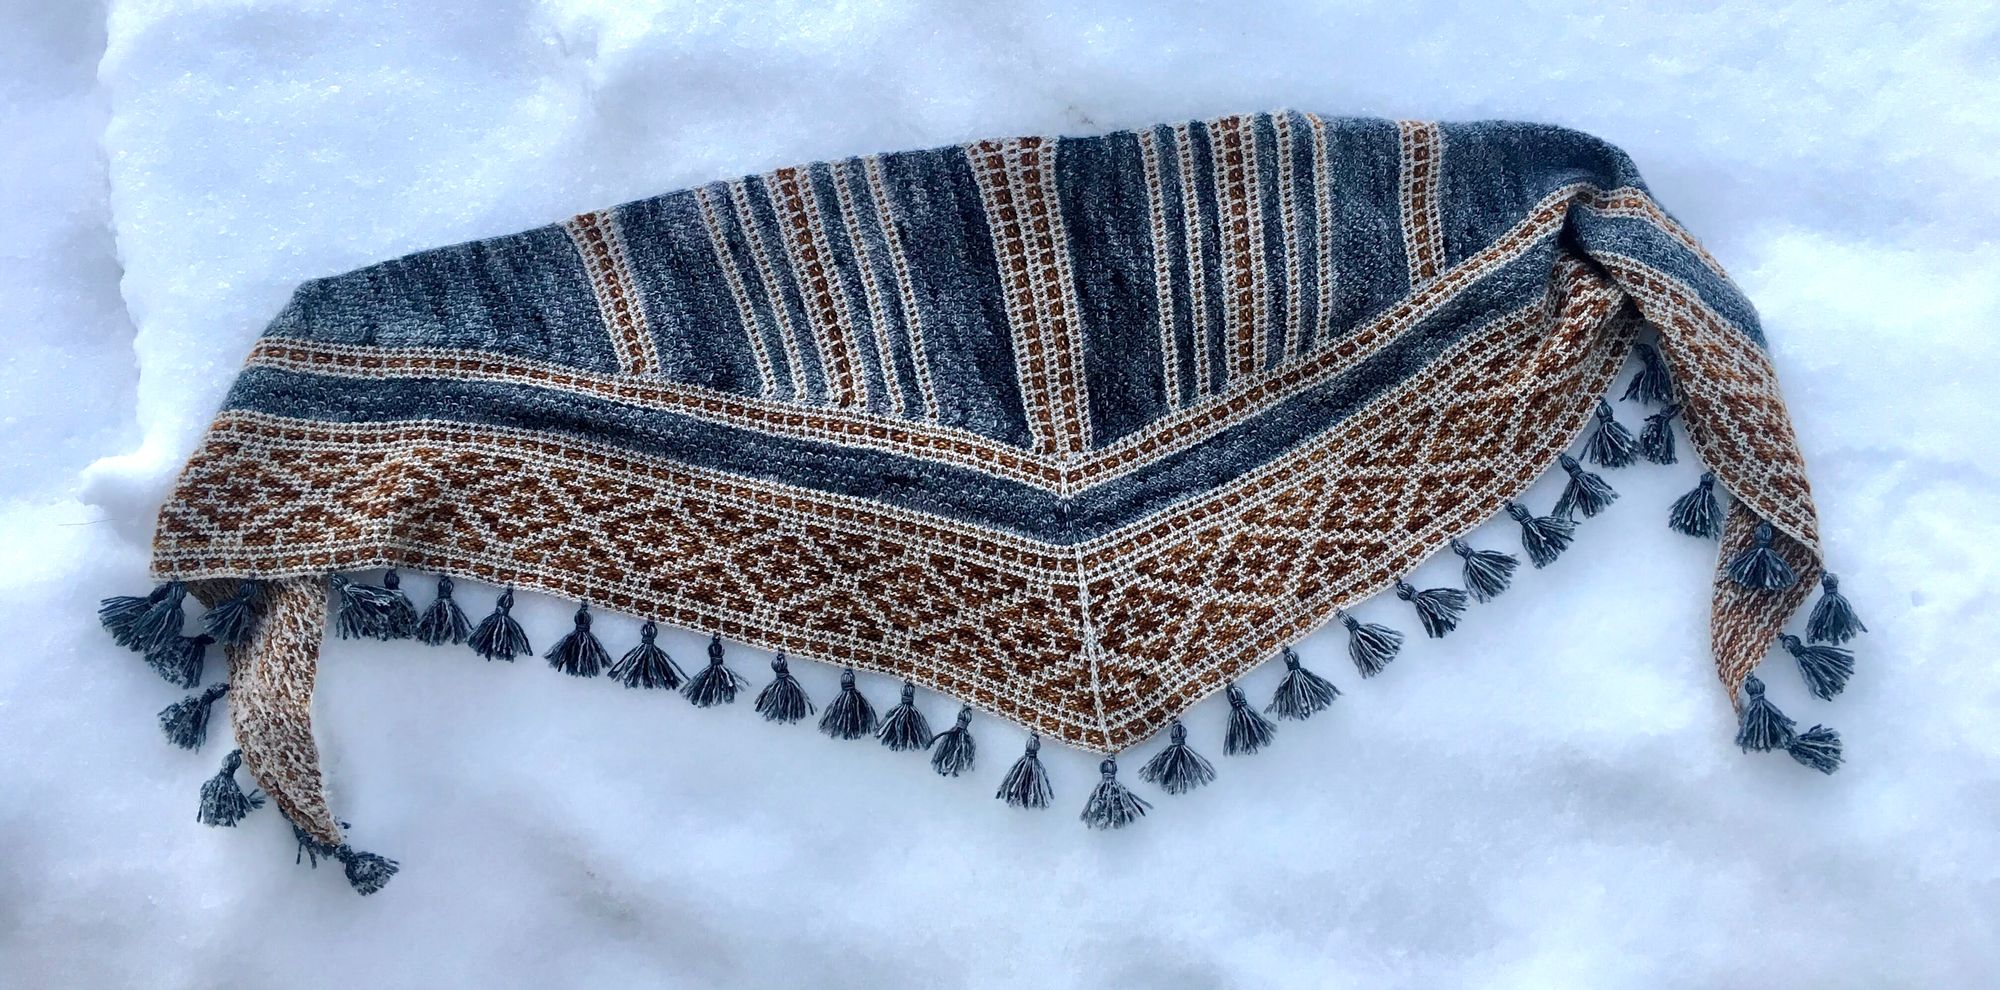 A tasseled shawl lying in the snow. The shawl is a mosaic pattern worked in a dusty blue yarn with gray and rust accent colors.